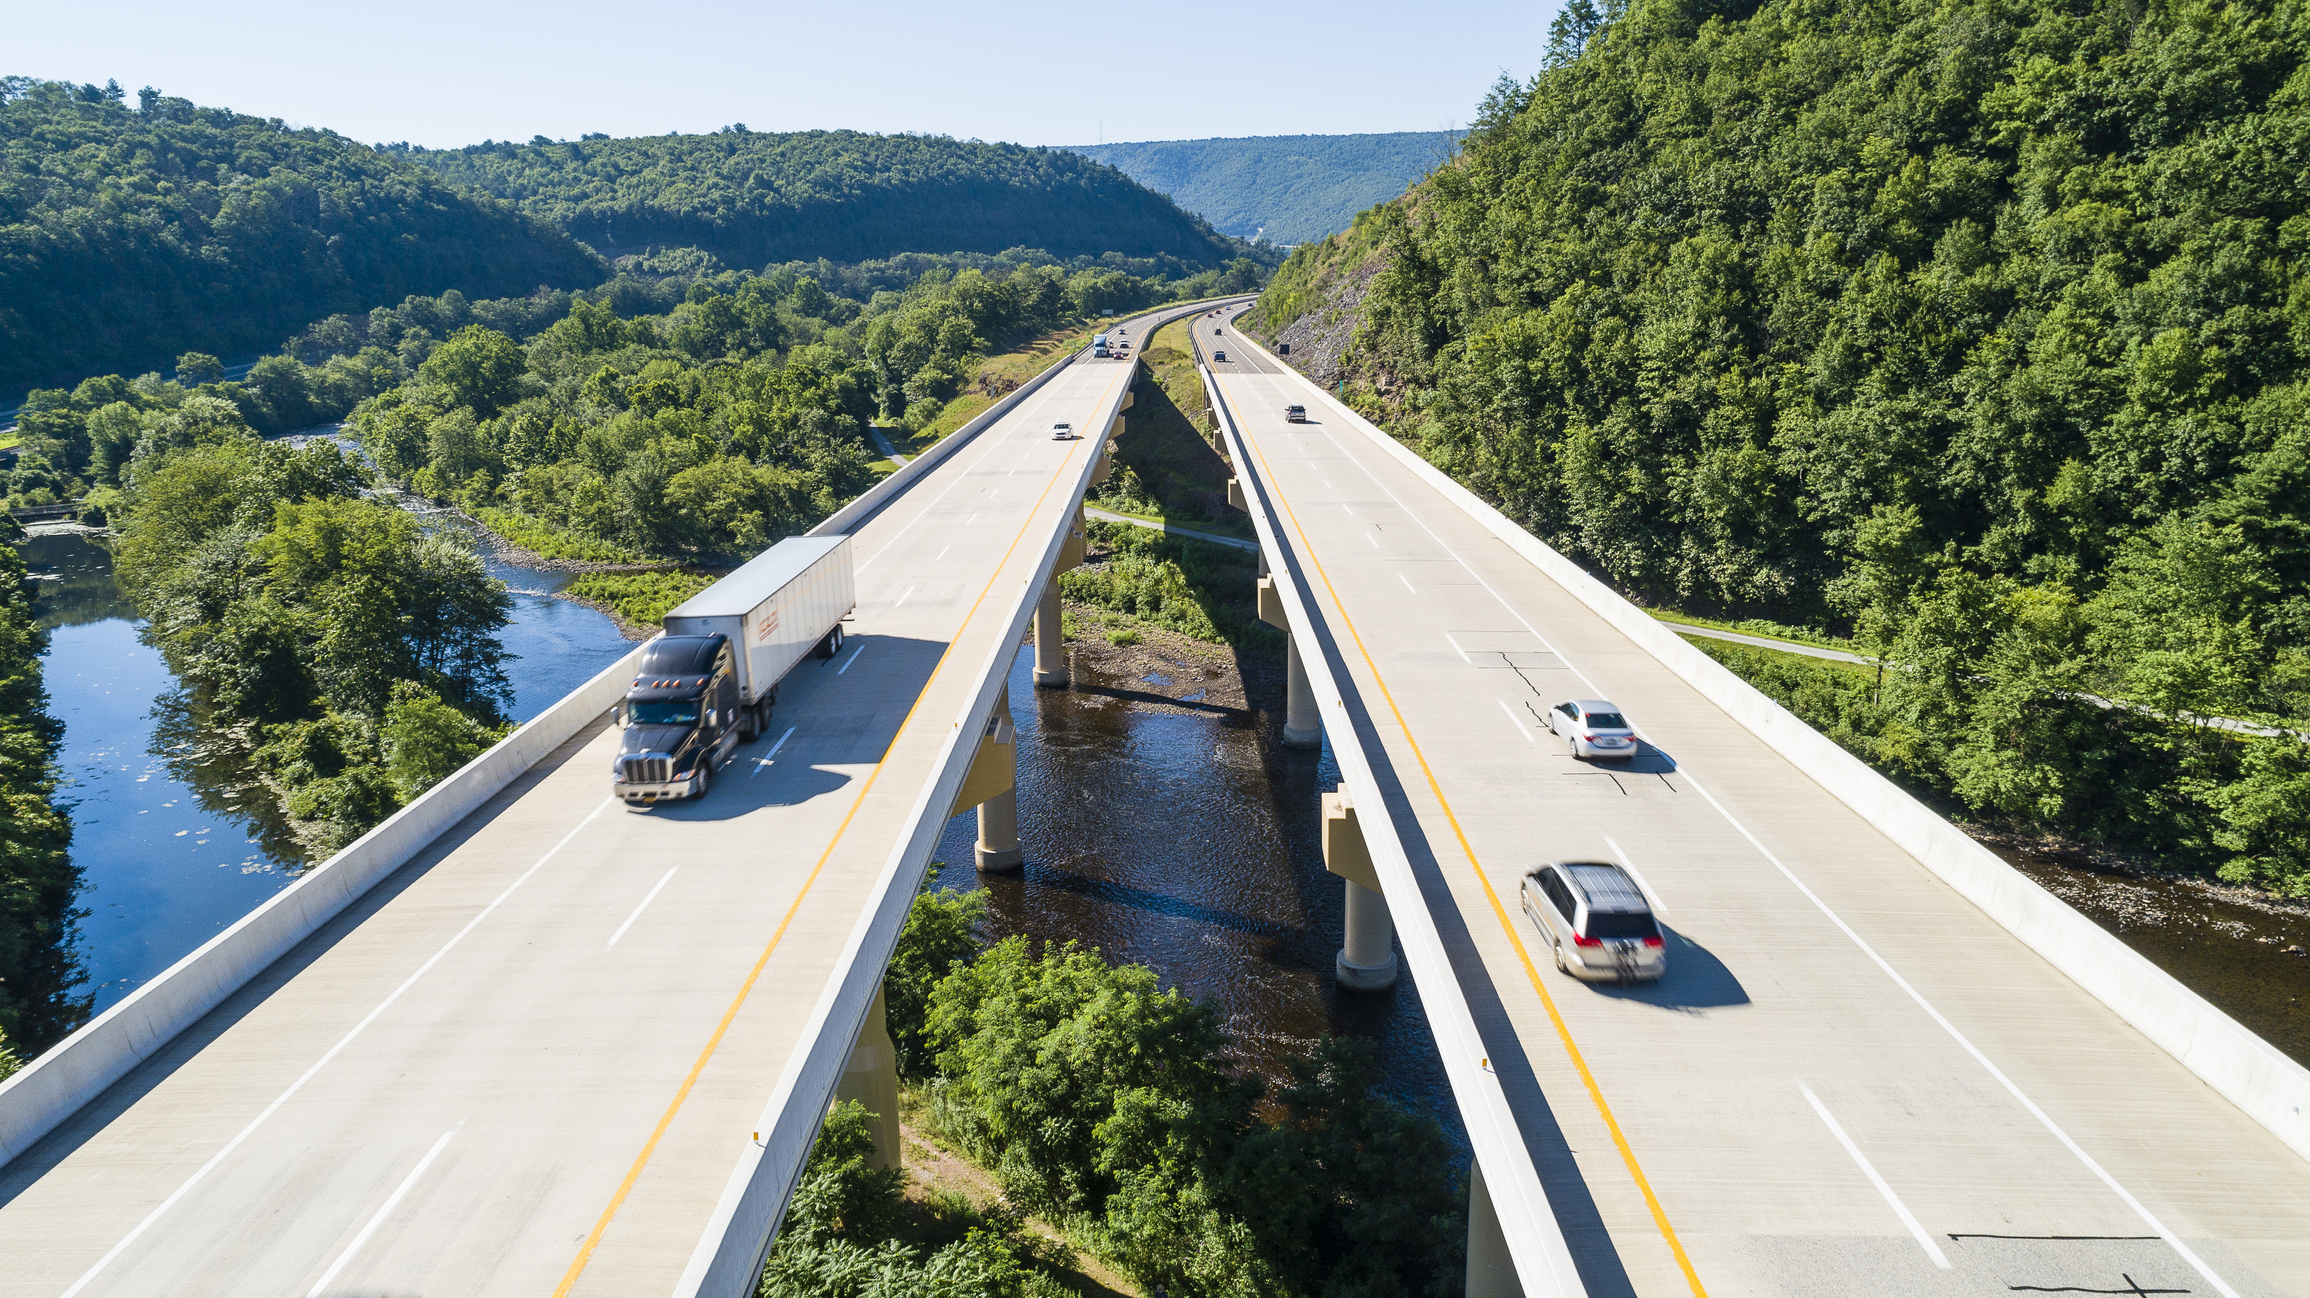 Transportation impacts due to trucks and cars travelling through mountains on bridge spanning river